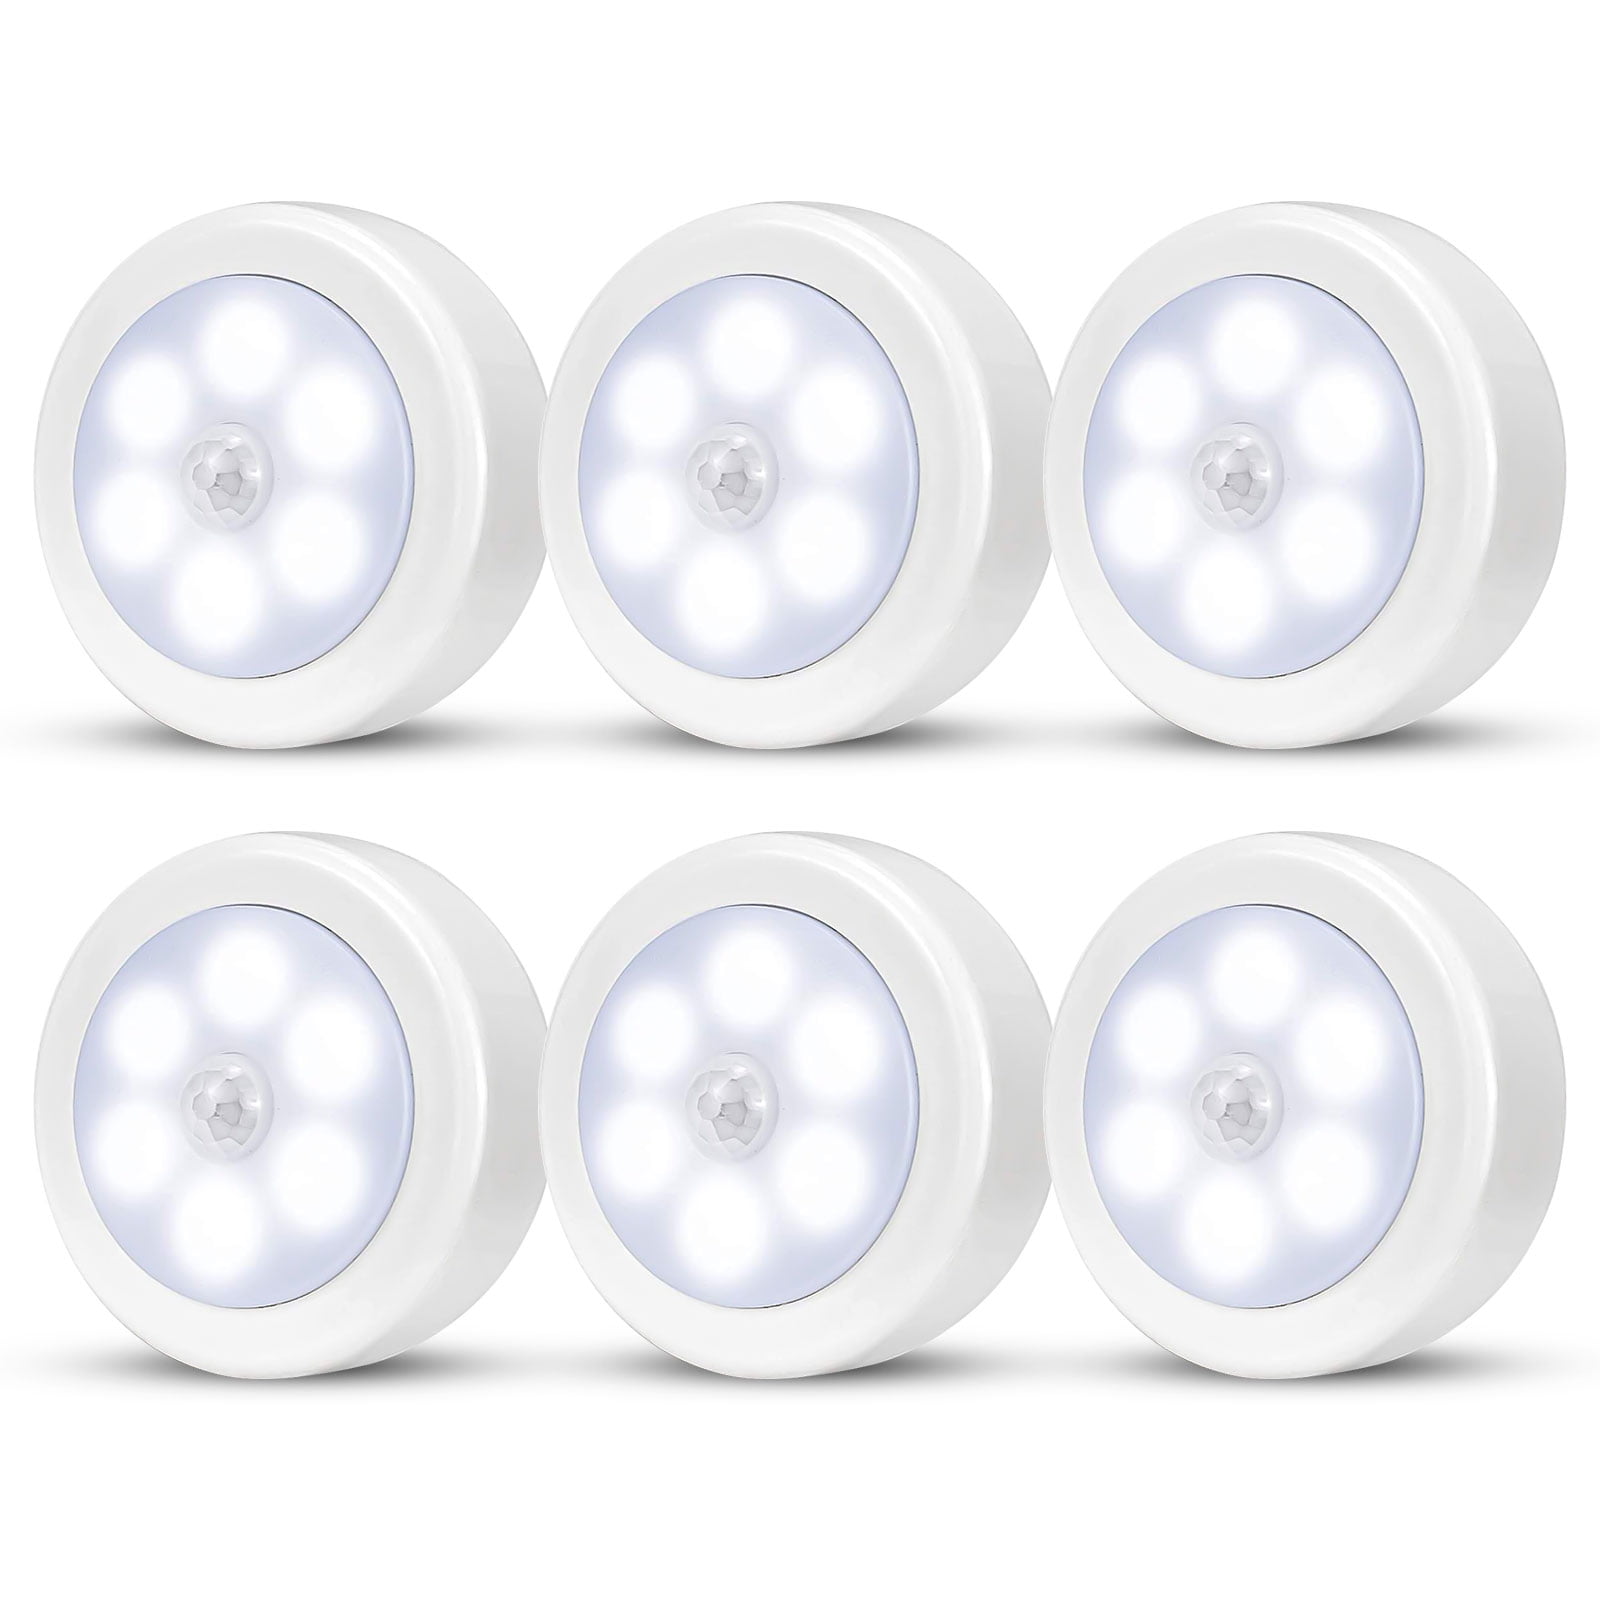 Details about   Motion Sensor LED Night Light 360 Rotating Kitchen Bedroom Stair Wall Lamp 